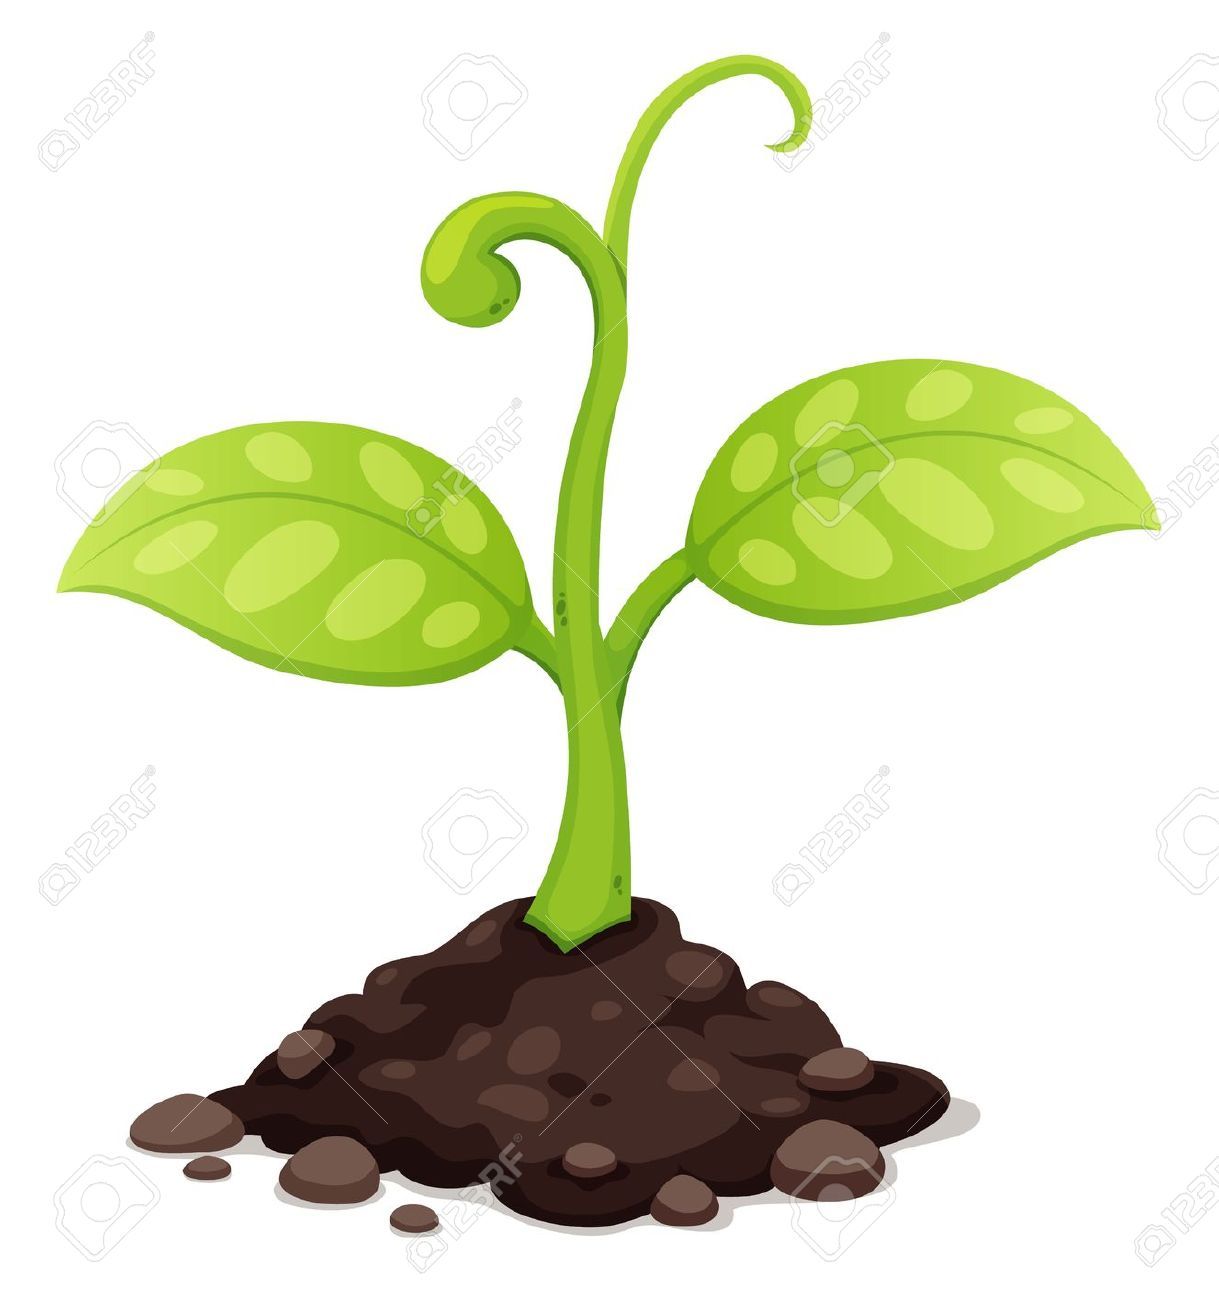 Seed Growing Images, Stock Pictures, Royalty Free Seed